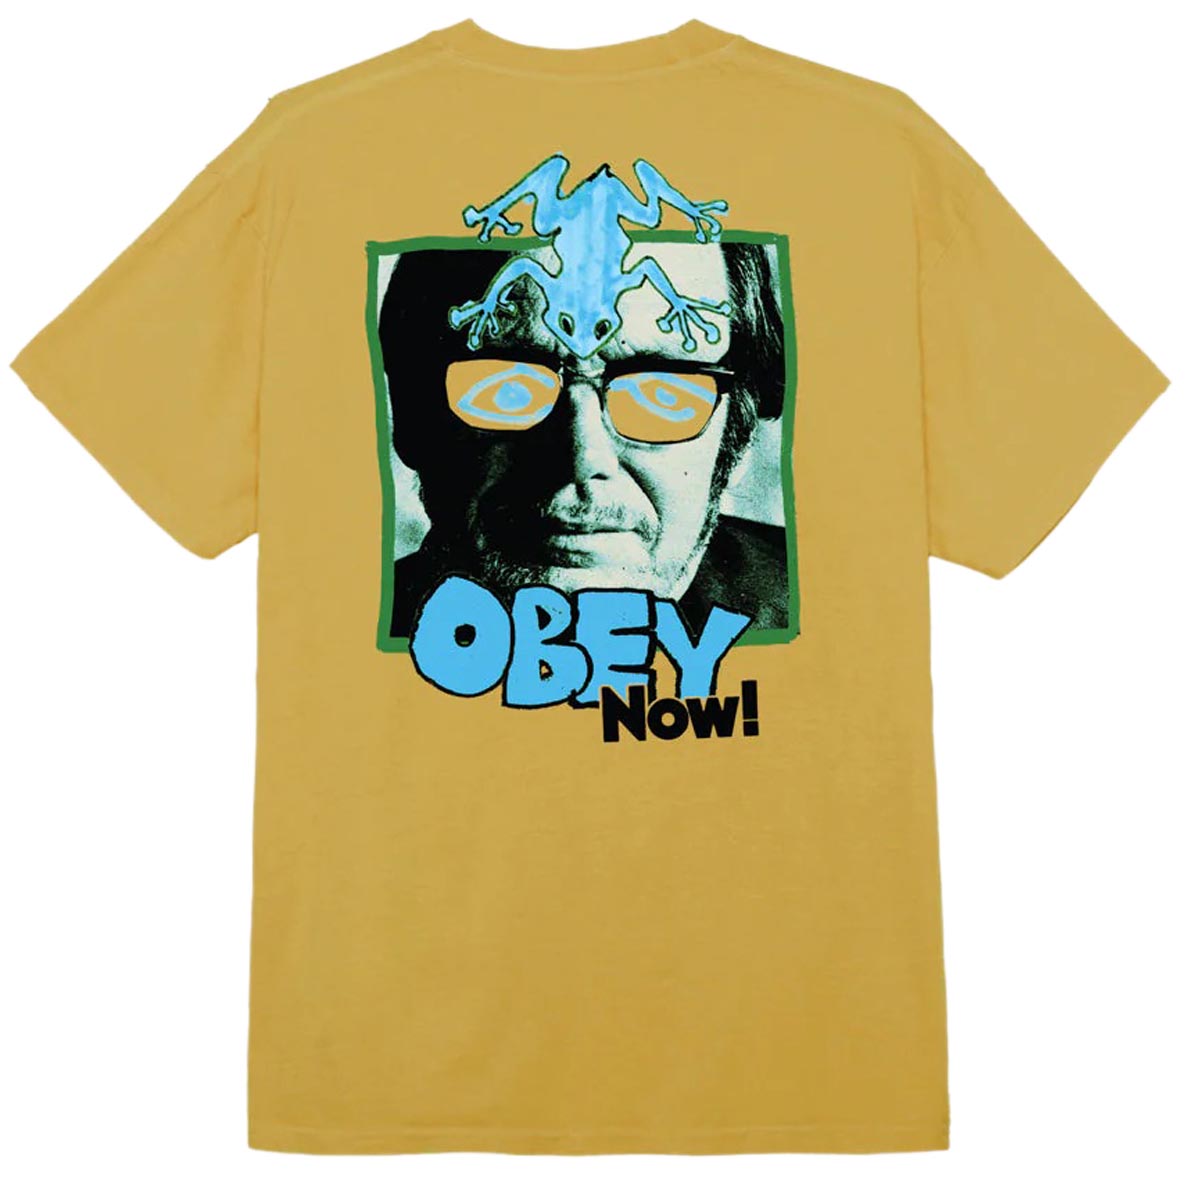 Obey Now! T-Shirt - Pigment Sunflower image 1